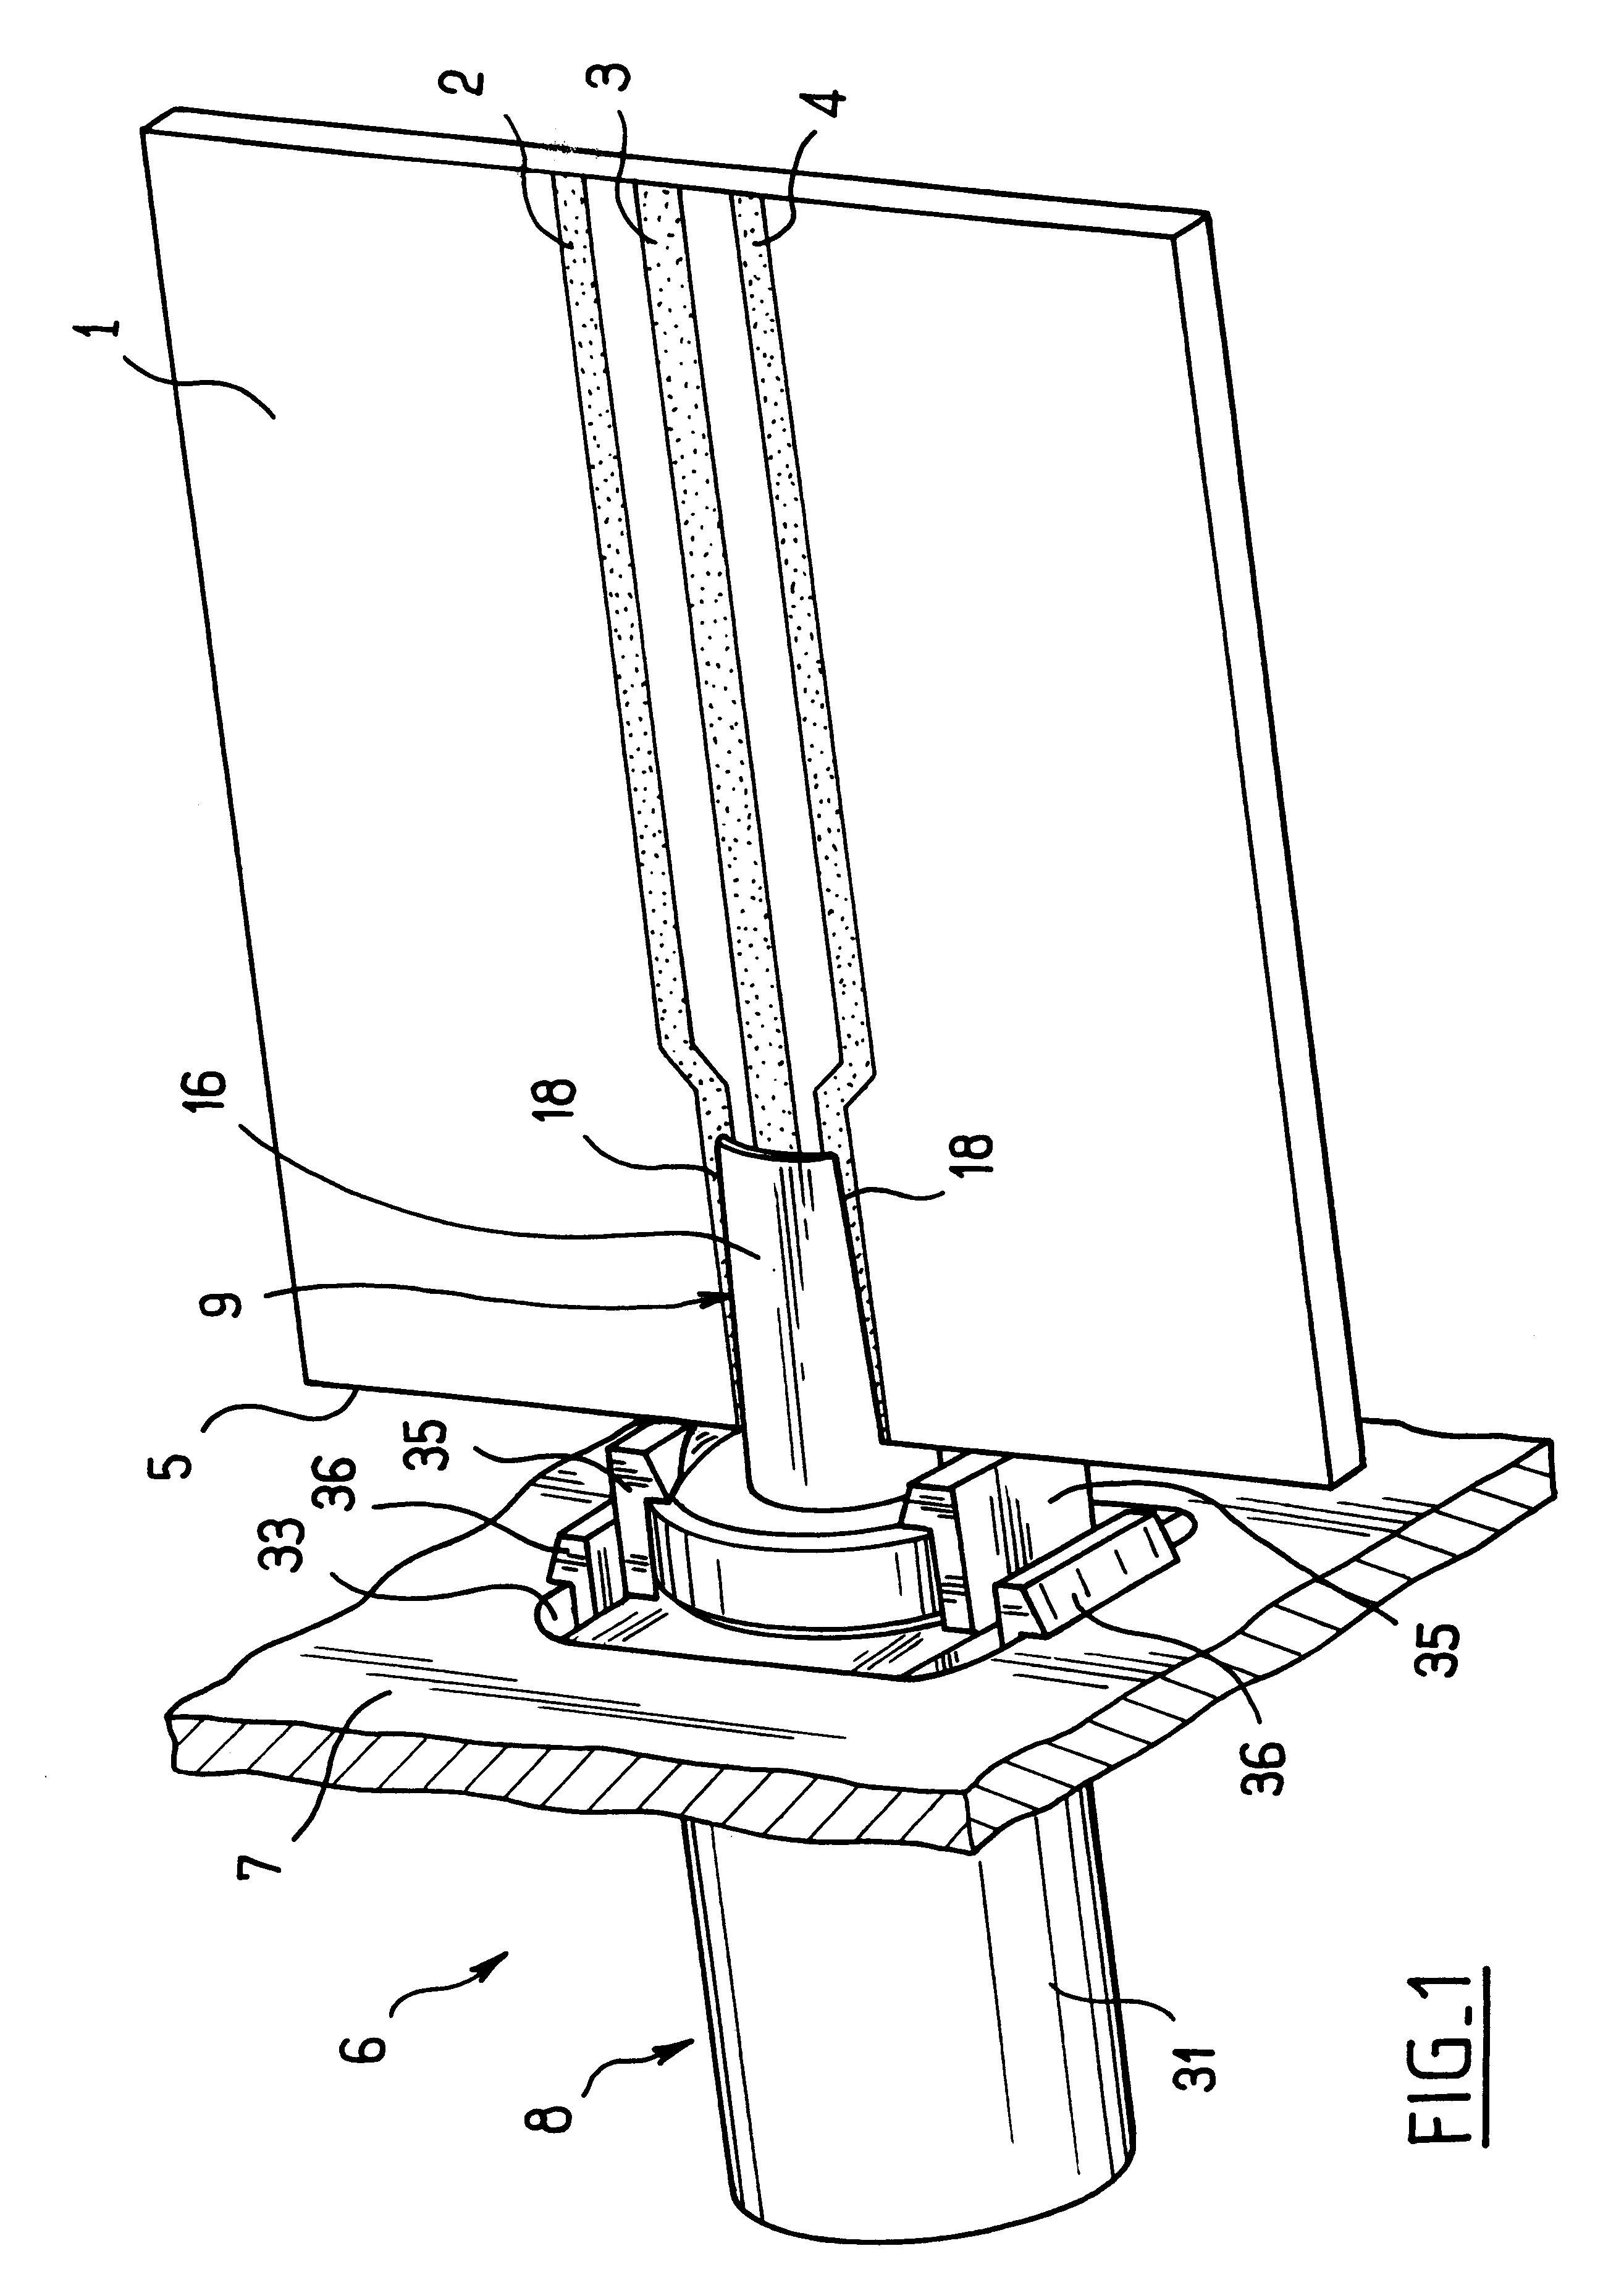 Device for electrically connecting a coaxial line to a printed circuit card